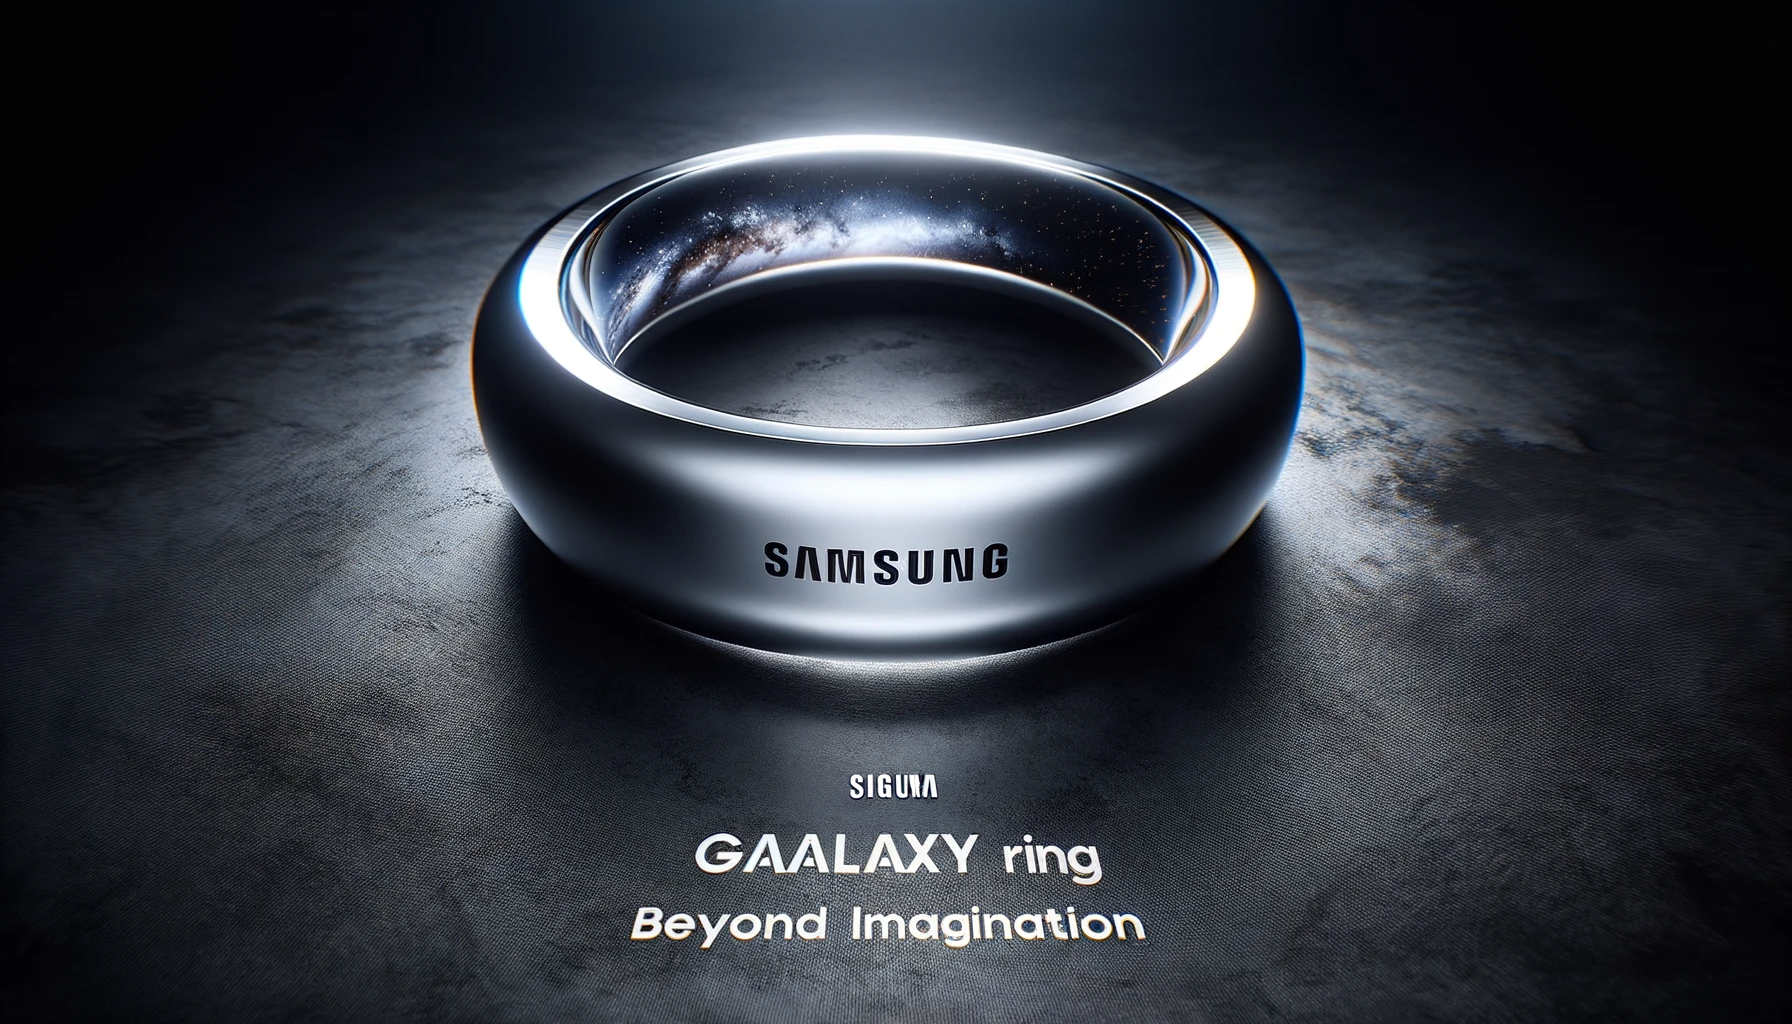 8K photo-realistic portrayal of the 'Samsung Galaxy Ring', as seen through the 'Sigma 24mm f_8' lens. The ring is showcased on a graphite canvas, refl